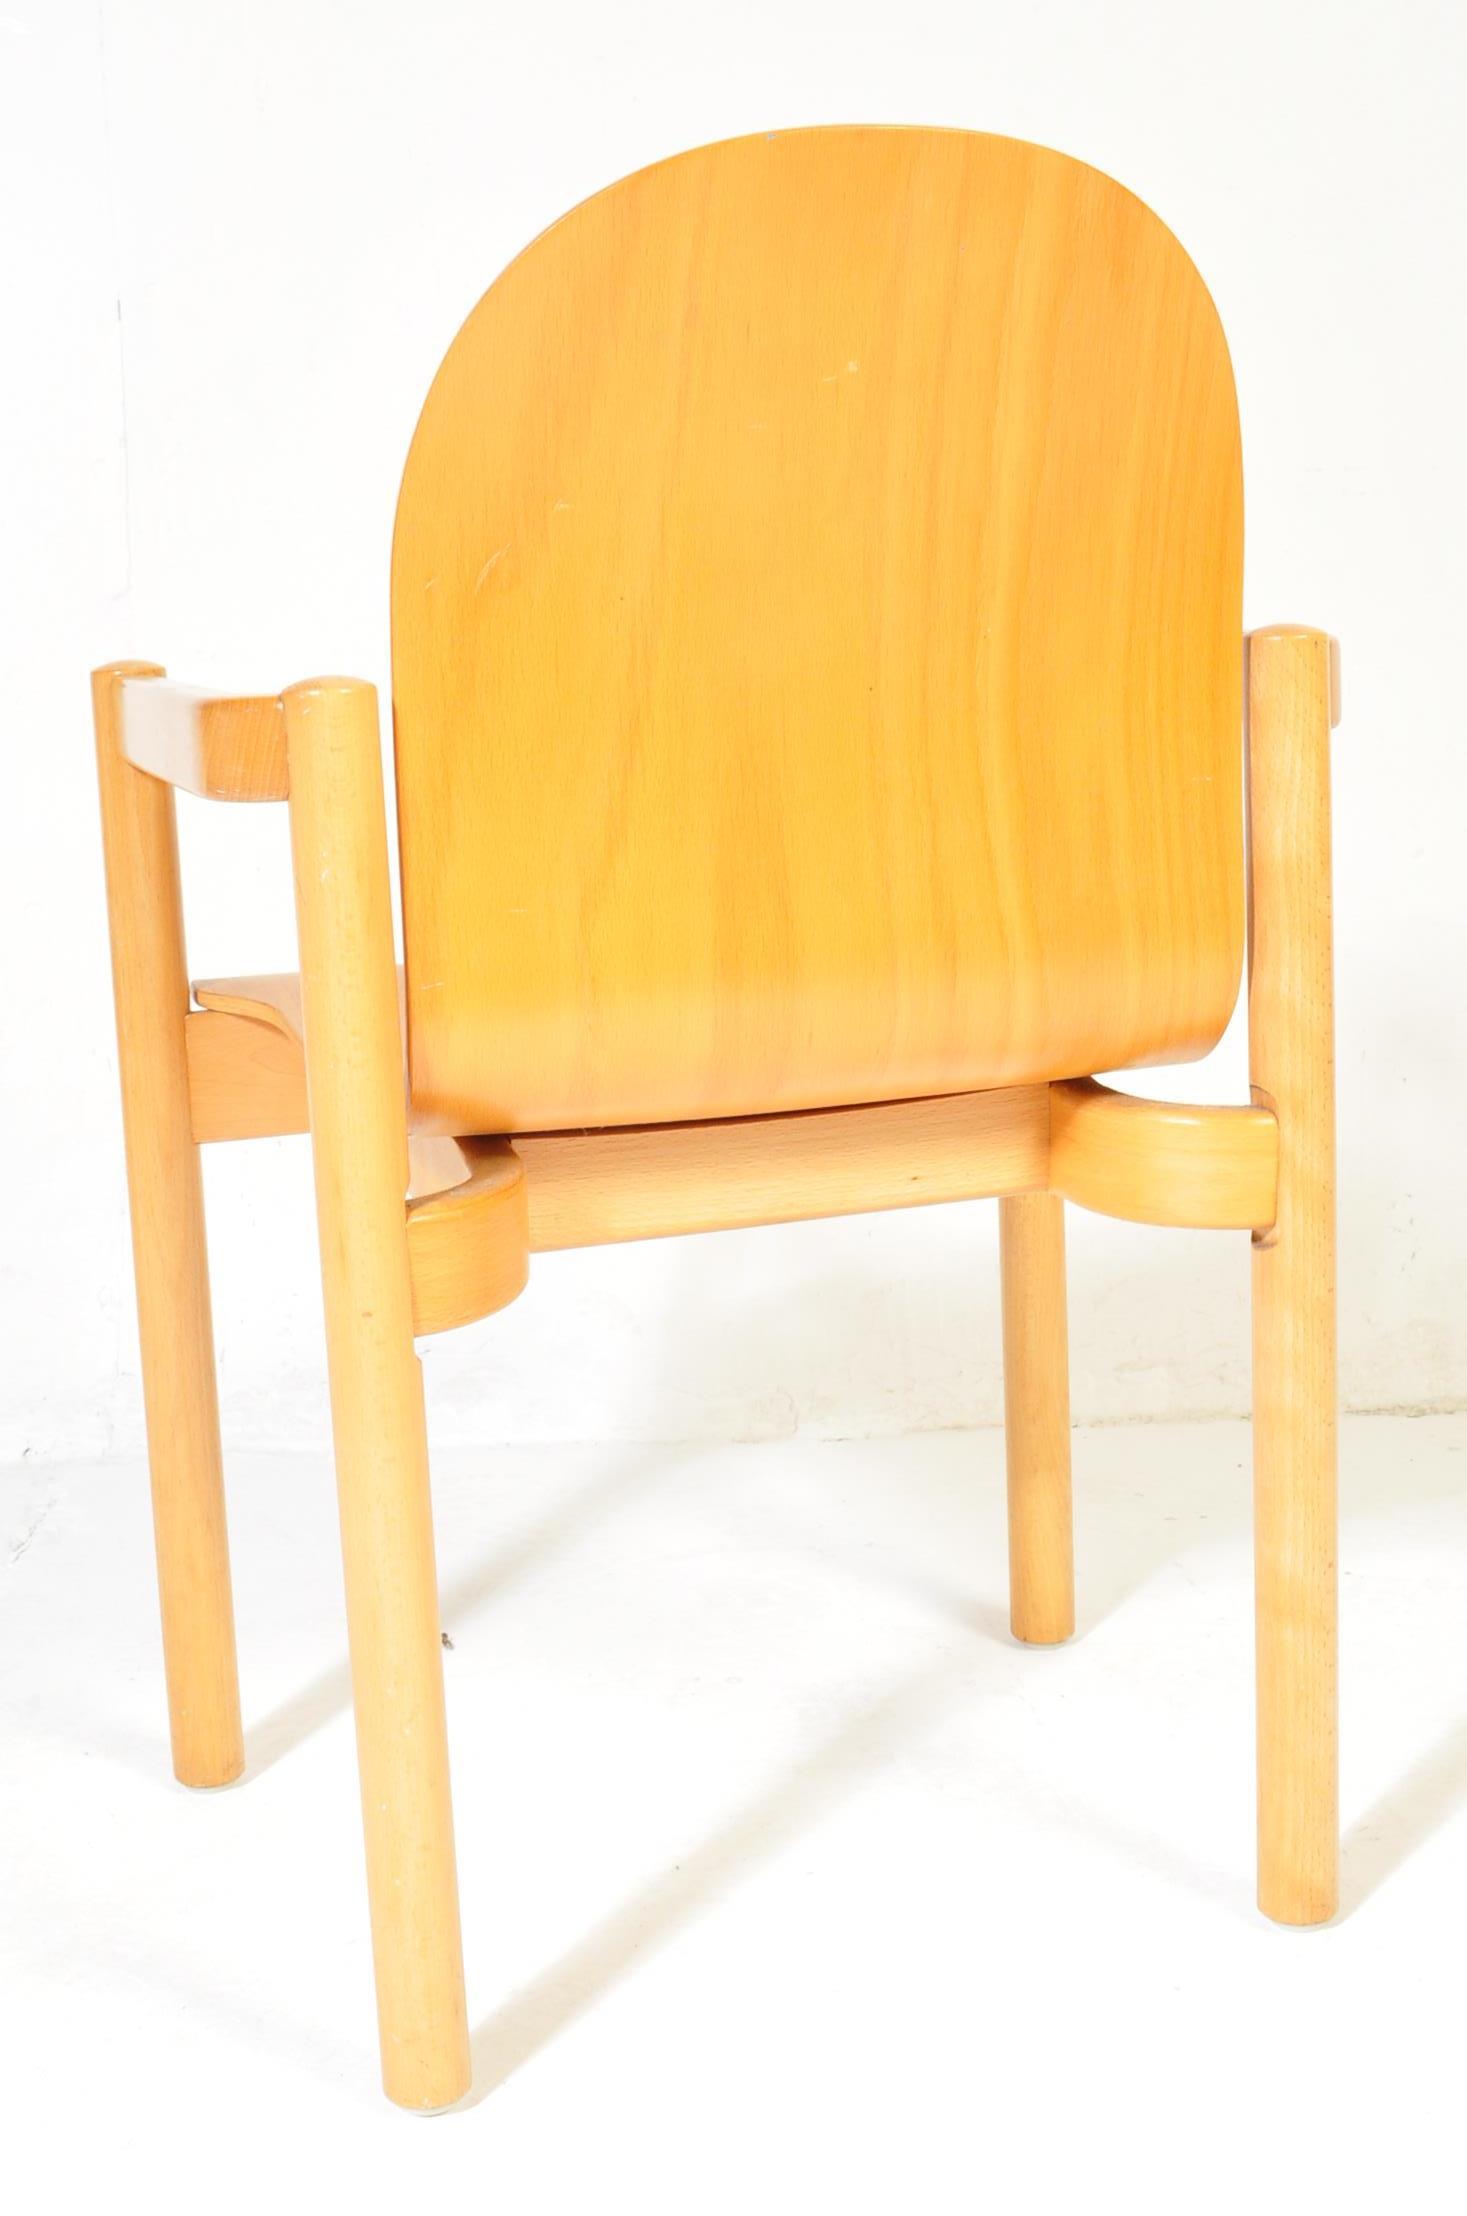 RETRO VINTAGE BENTWOOD OFFICE CHAIR - Image 3 of 4